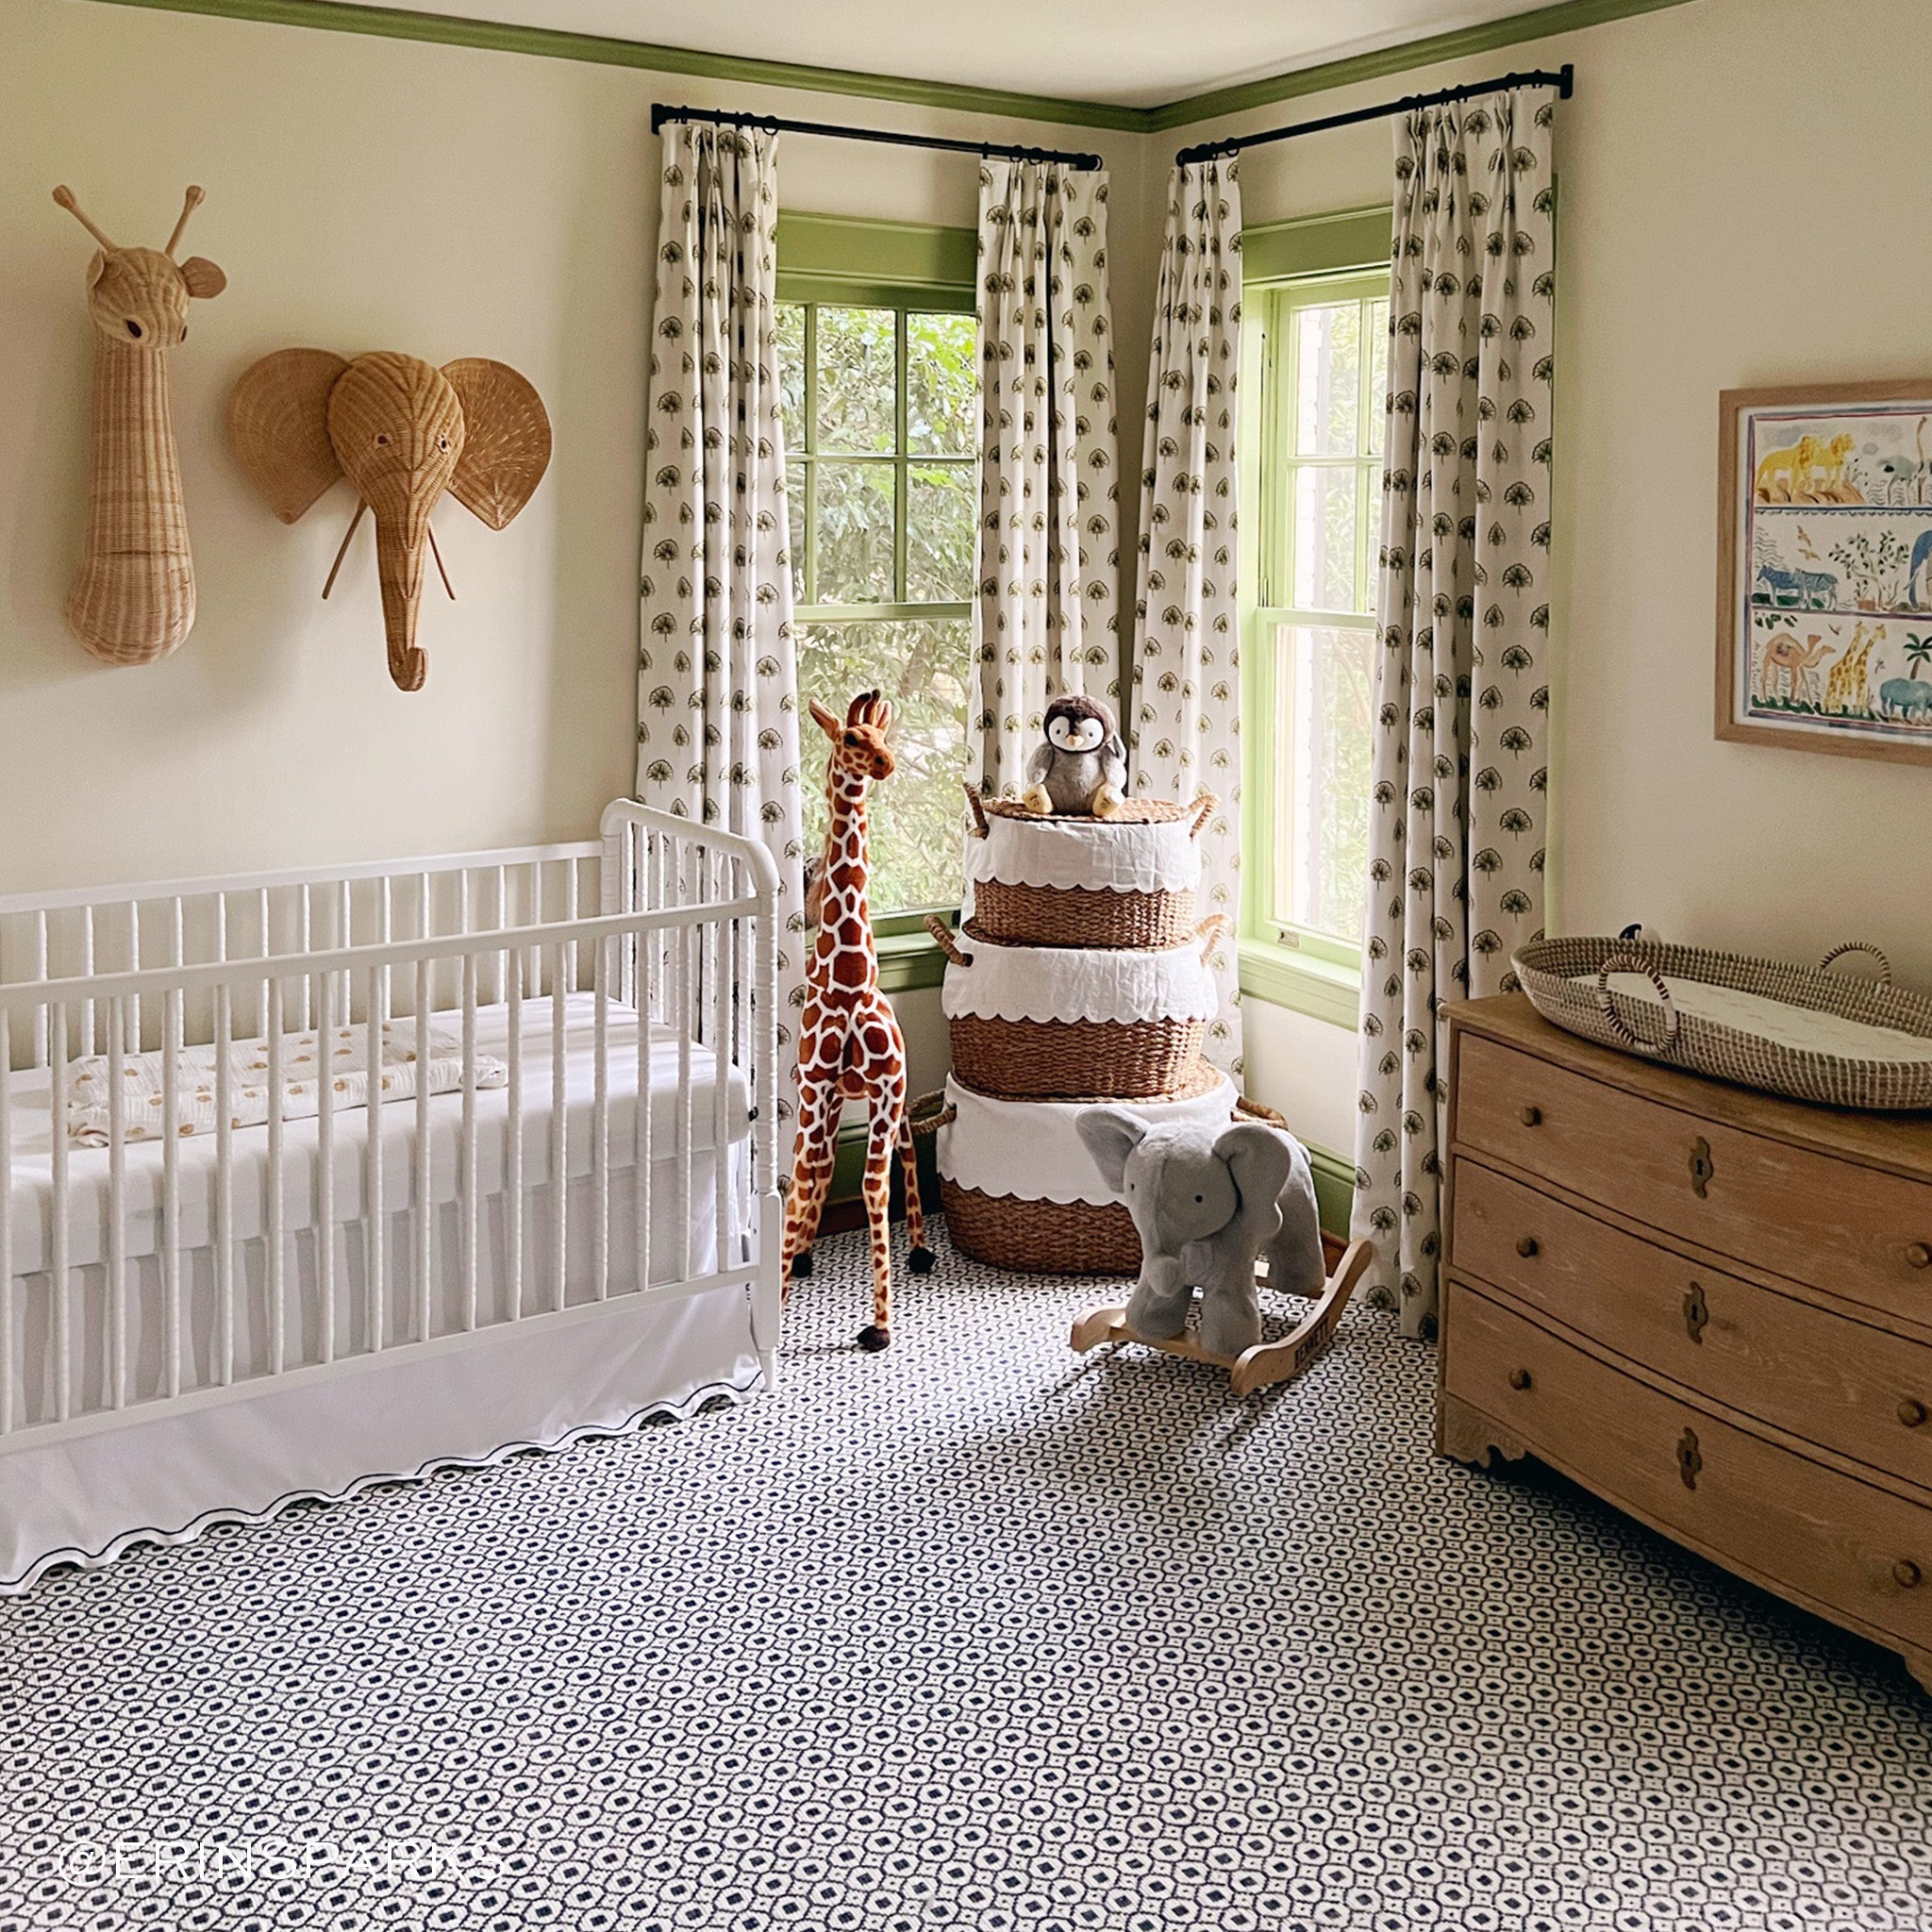 Nursery room styles with Green Floral Printed Curtains next to white crib and wooden dresser. Photo taken by Erin Spark